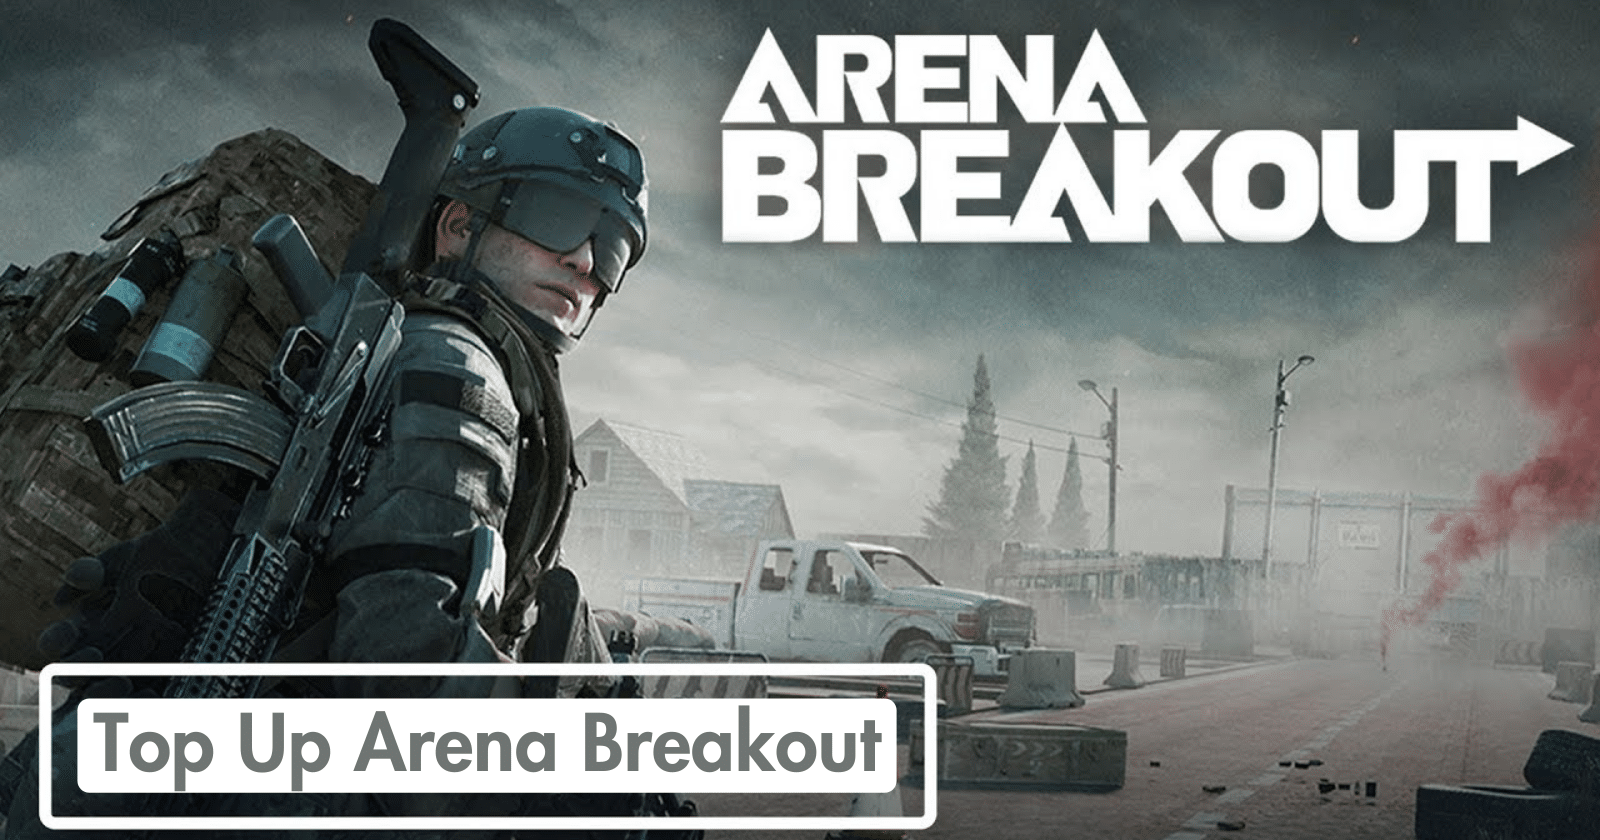 Arena breakout steam фото 88